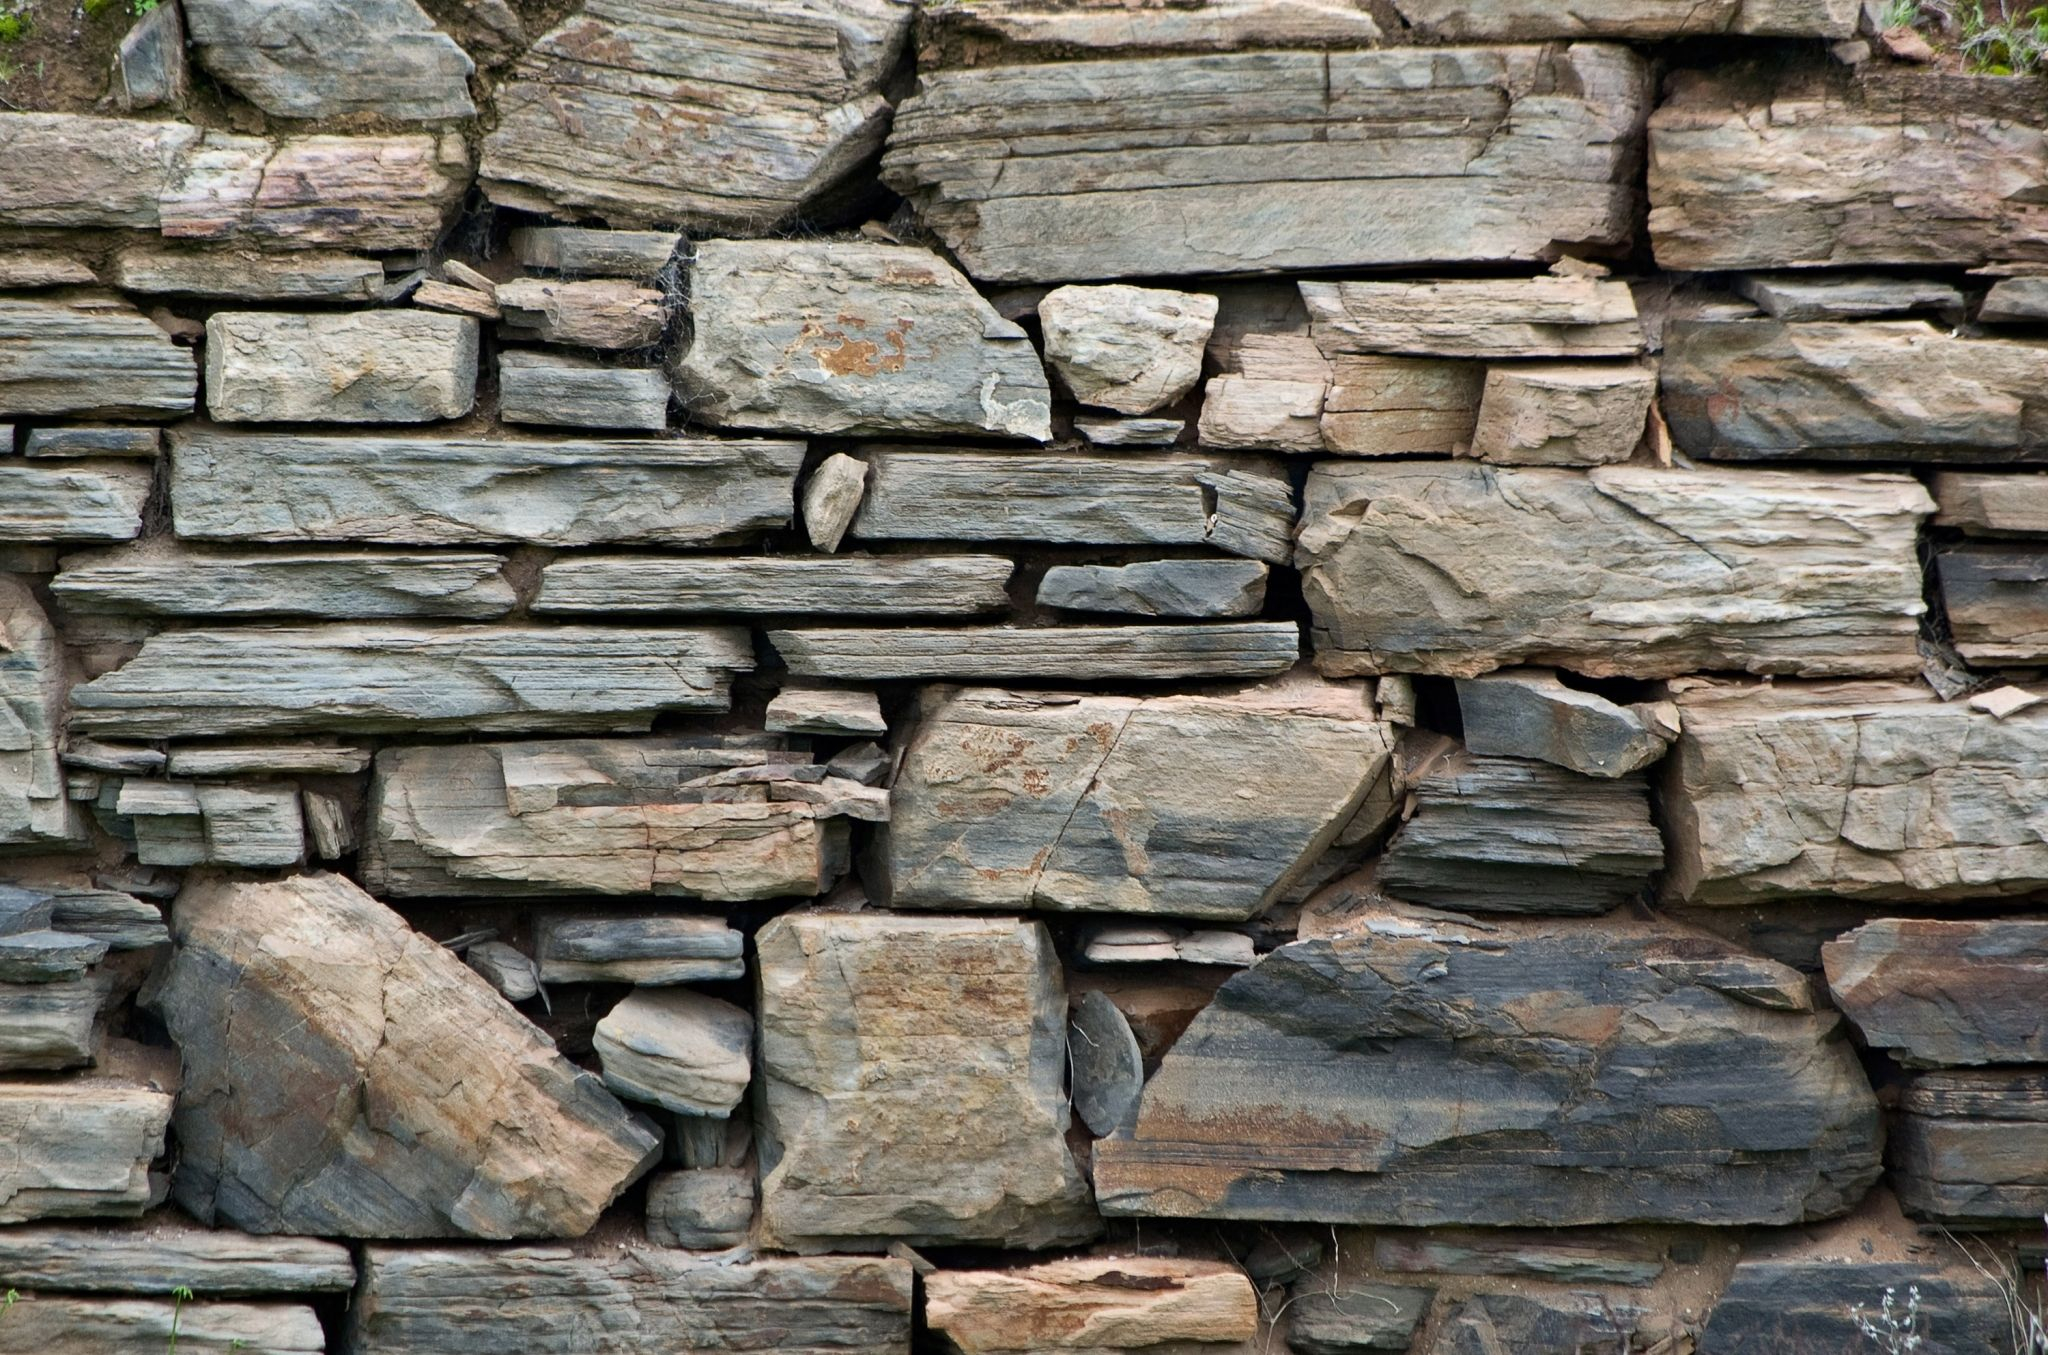 2048x1355 stone background wallpaper for computer free | Dry stone wall, High resolution wallpapers, Stone